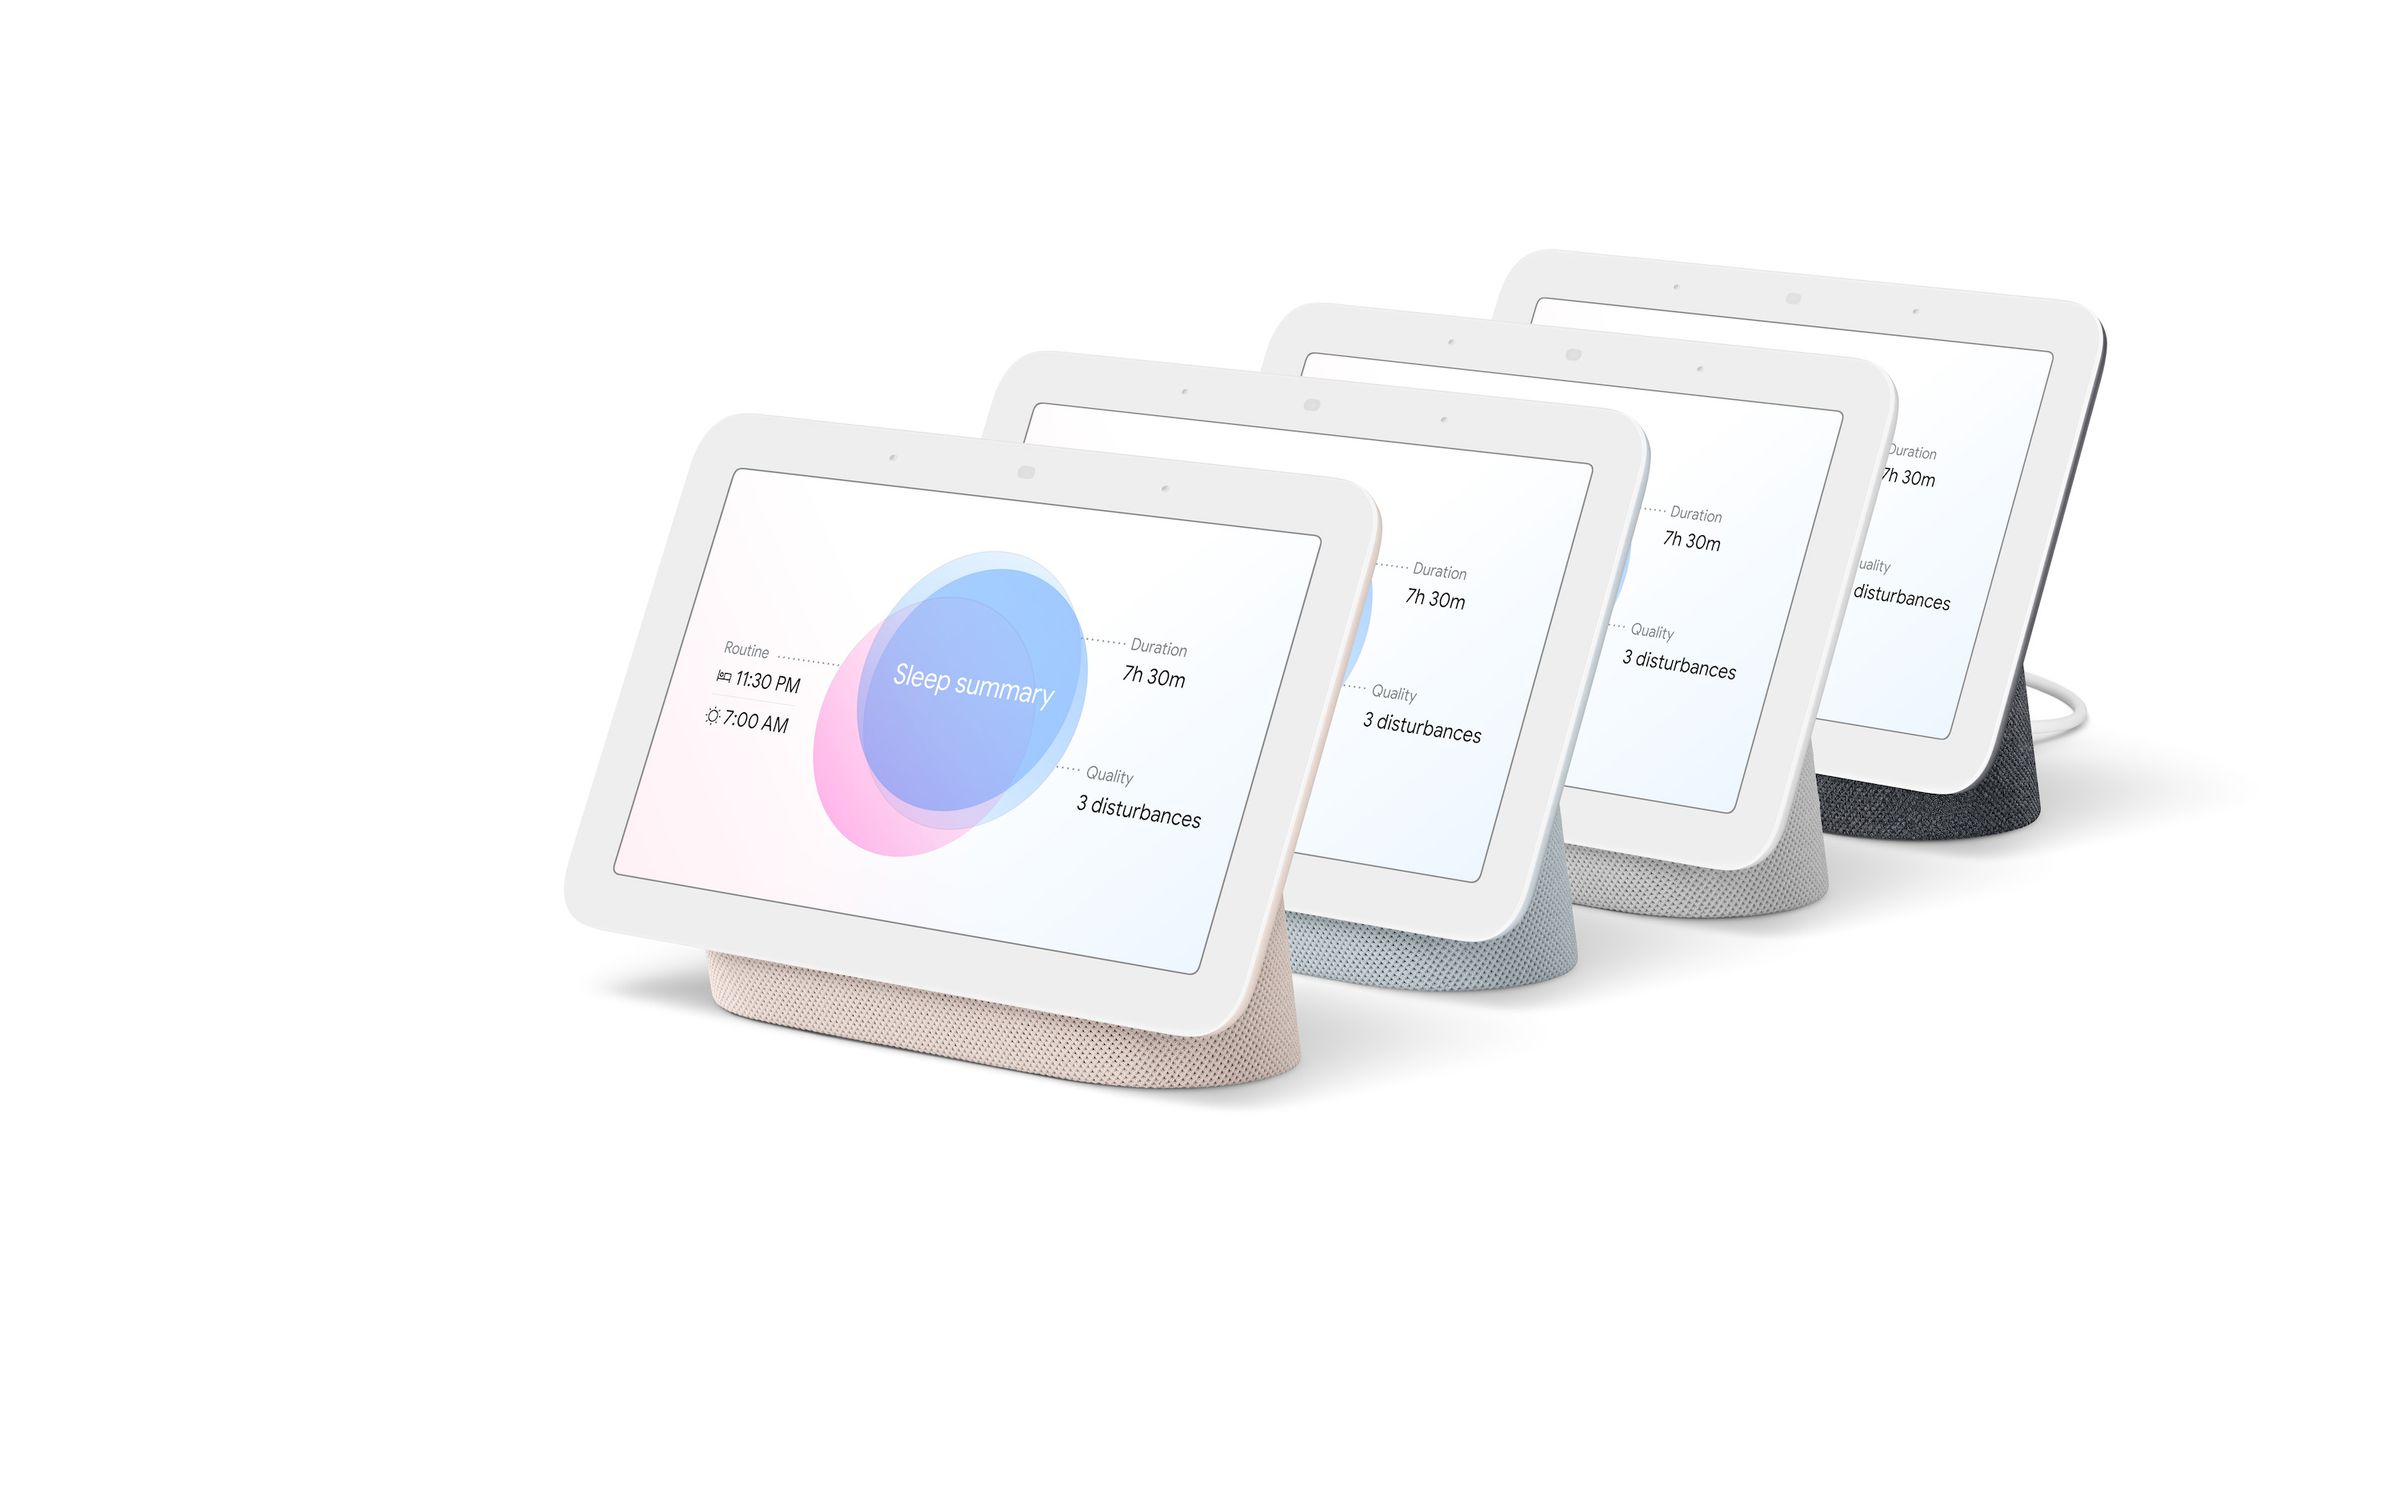 The Nest Hub is now available in four different colors: light pink, light blue, light gray, and dark gray.